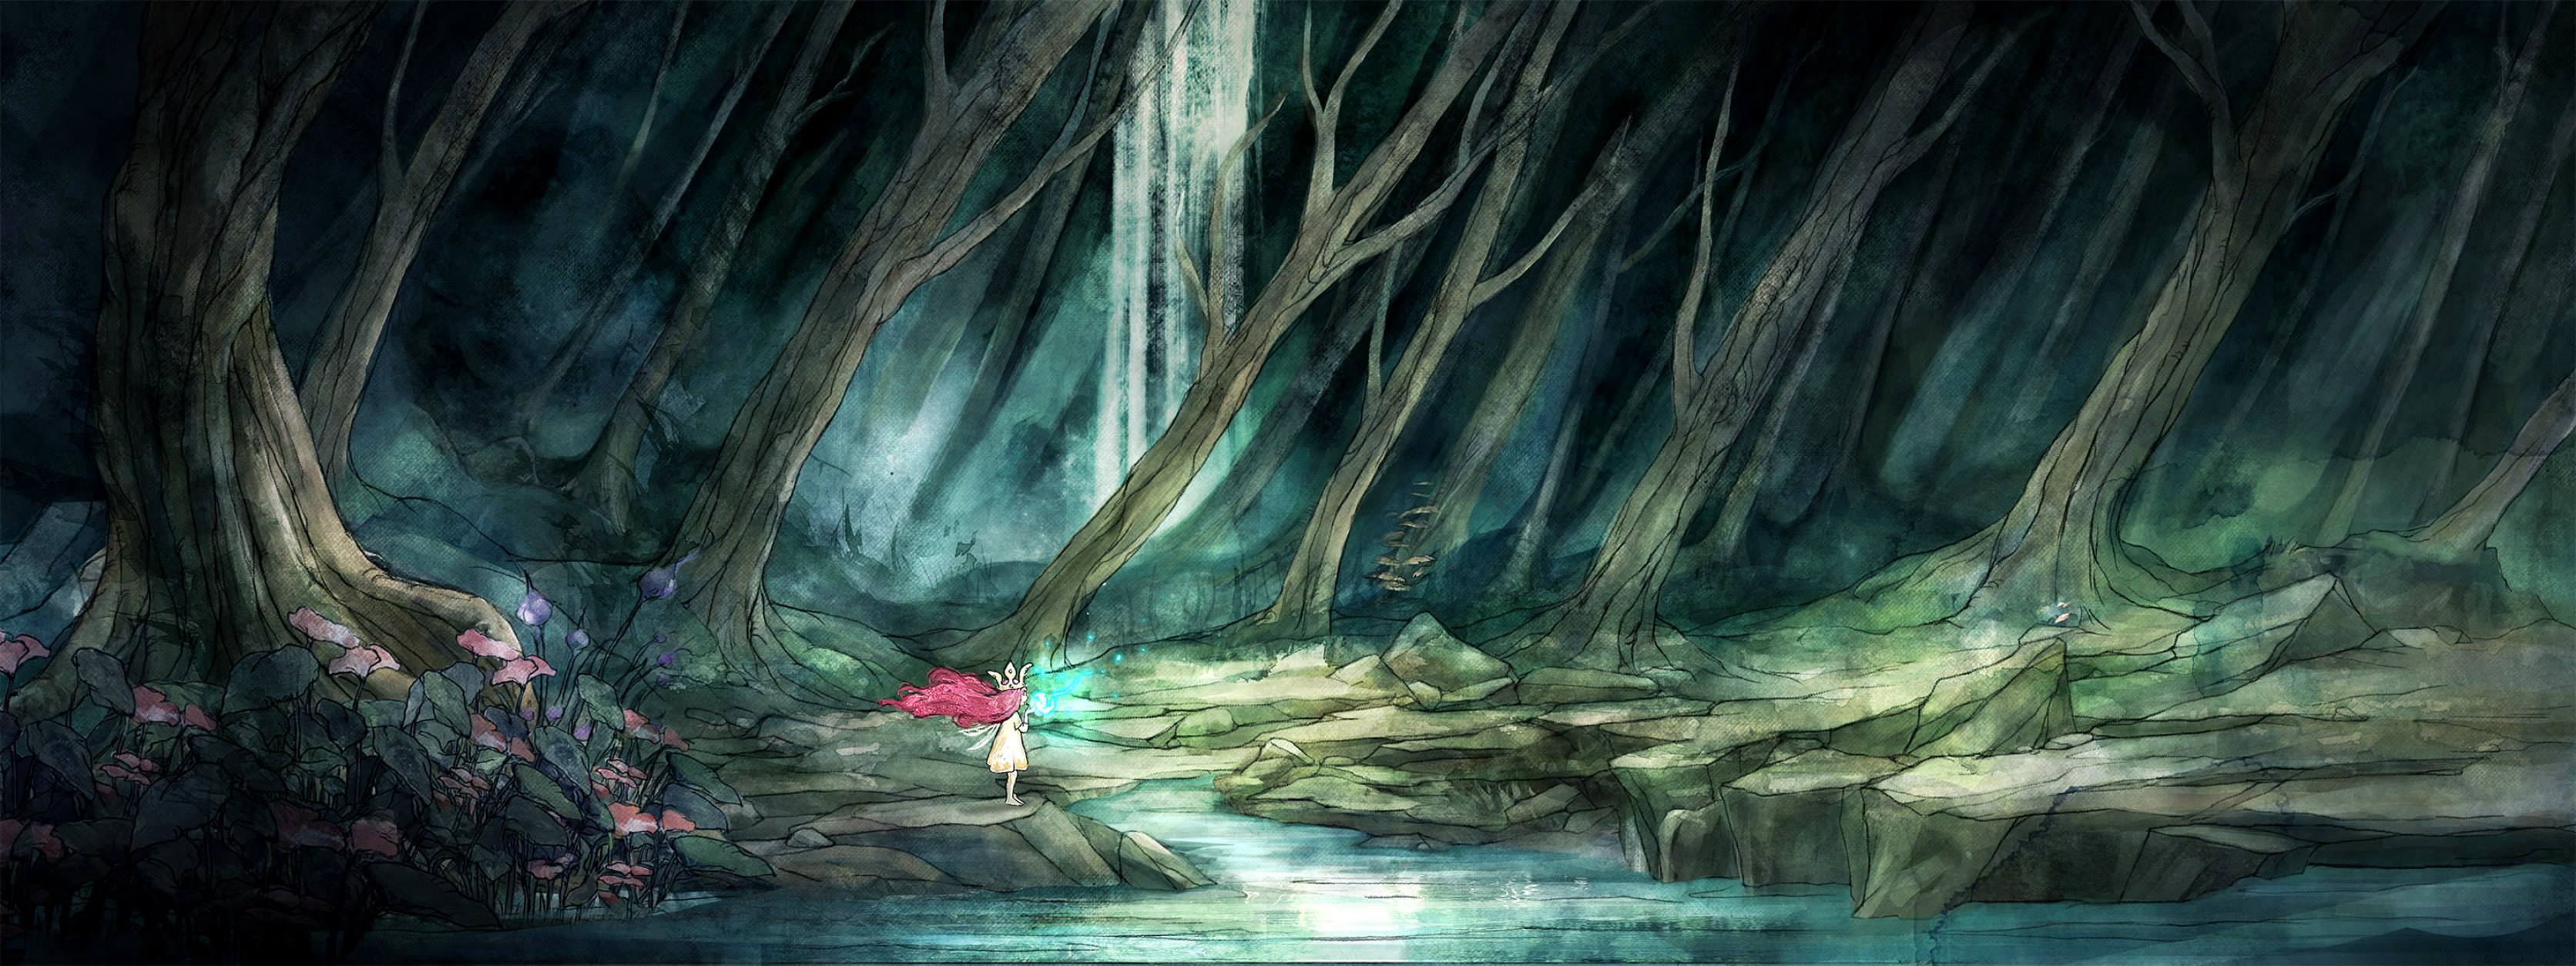 Child of Light Wallpapers